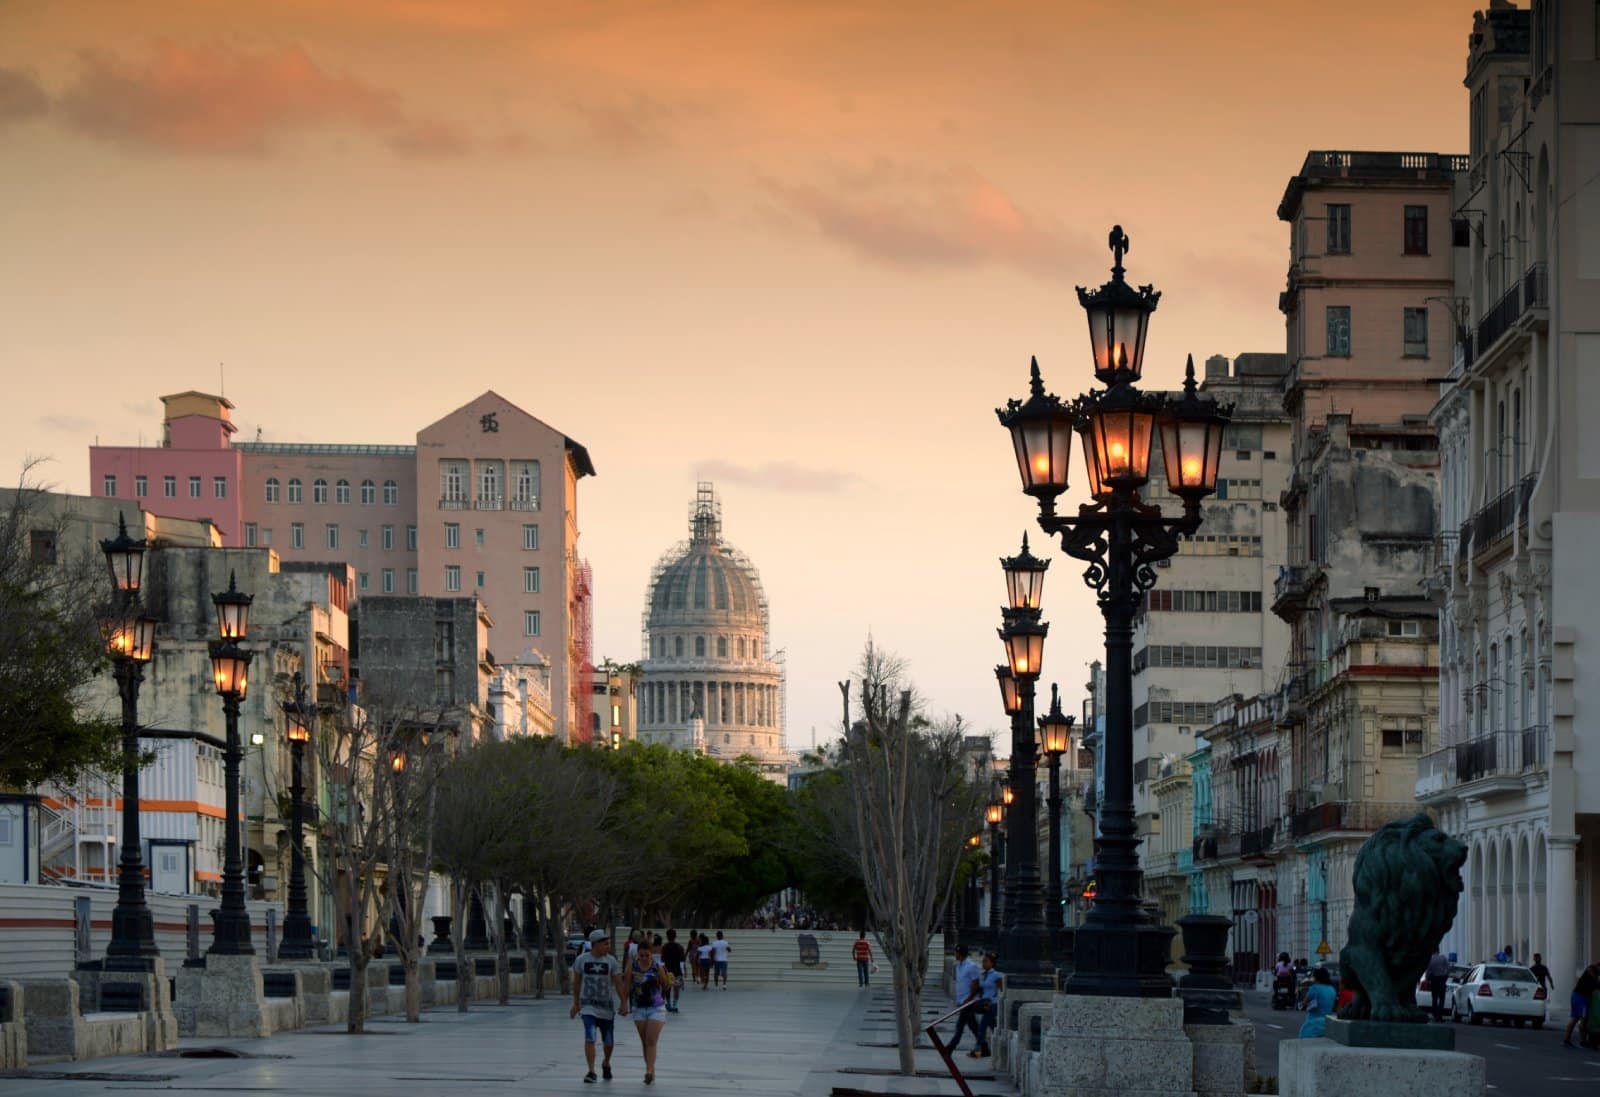 <p class="wp-caption-text">Image Credit: Shutterstock / unverdorben jr</p>  <p>Step back in time in Havana, where vintage cars, colorful buildings, and the rhythm of salsa fill the air.</p>